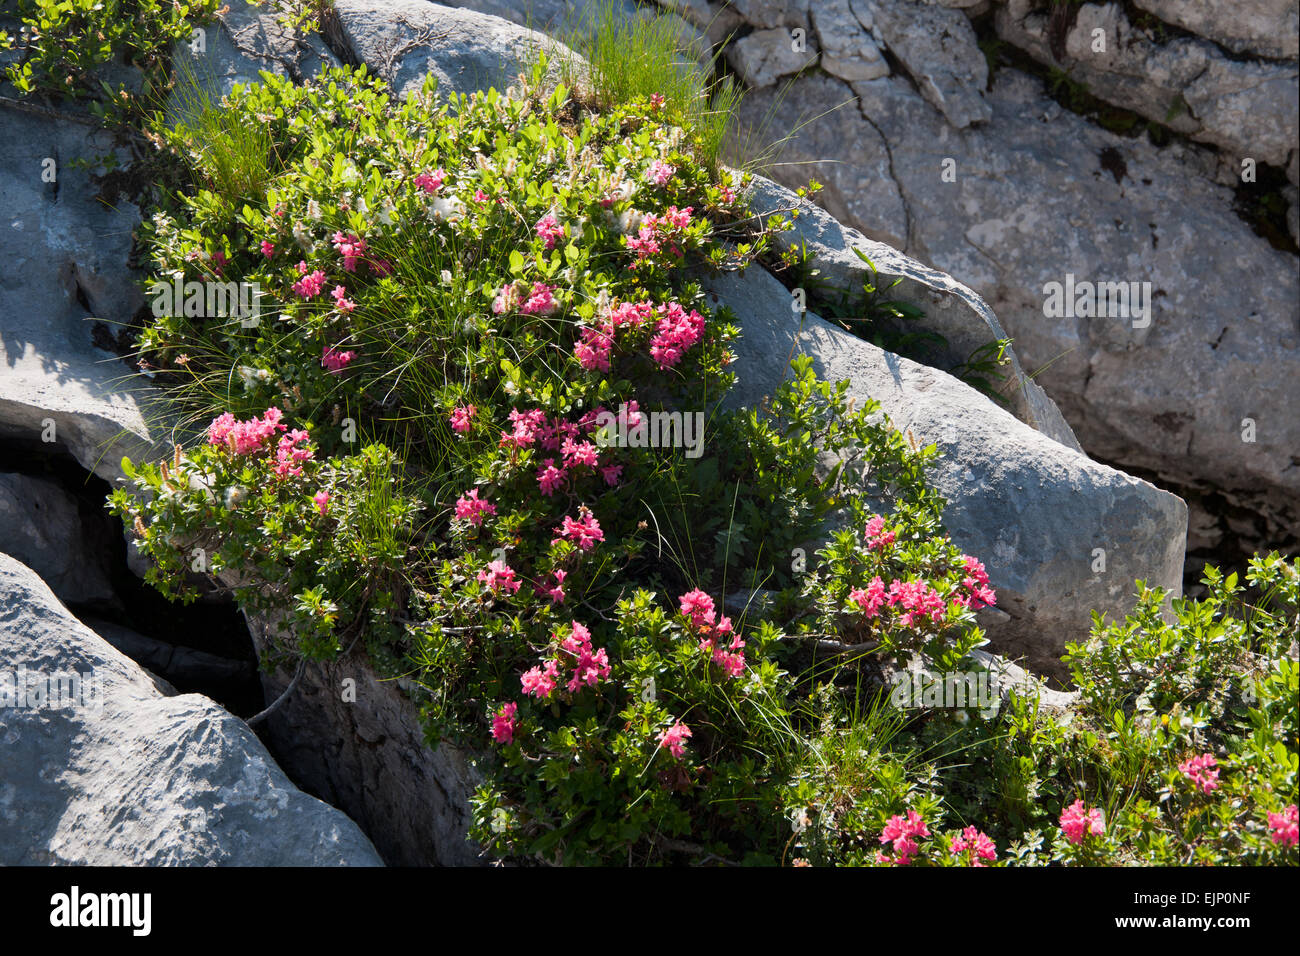 Rostblattrige alpenrose hi-res stock photography and images - Alamy